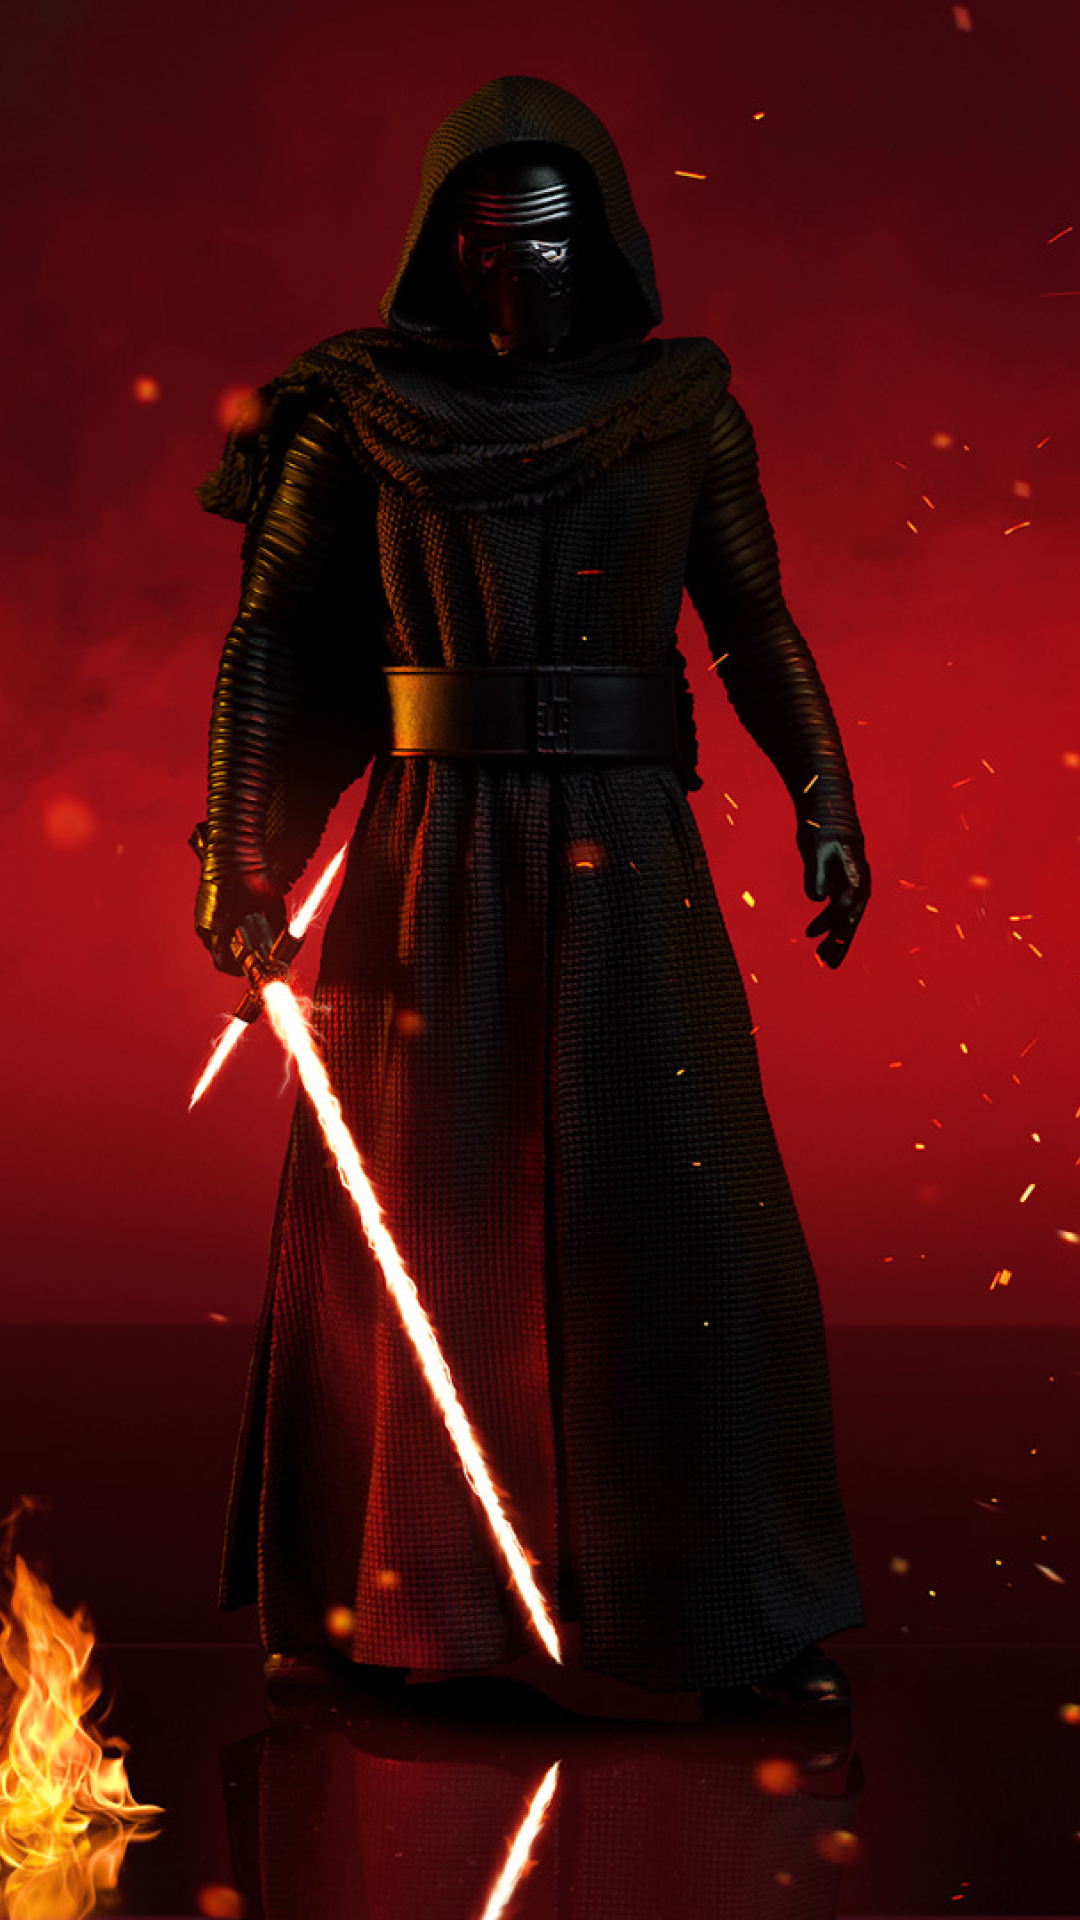 1080x1920 Kylo Ren With Lightsaber In Star Wars Iphone 7, 6s, 6 Plus